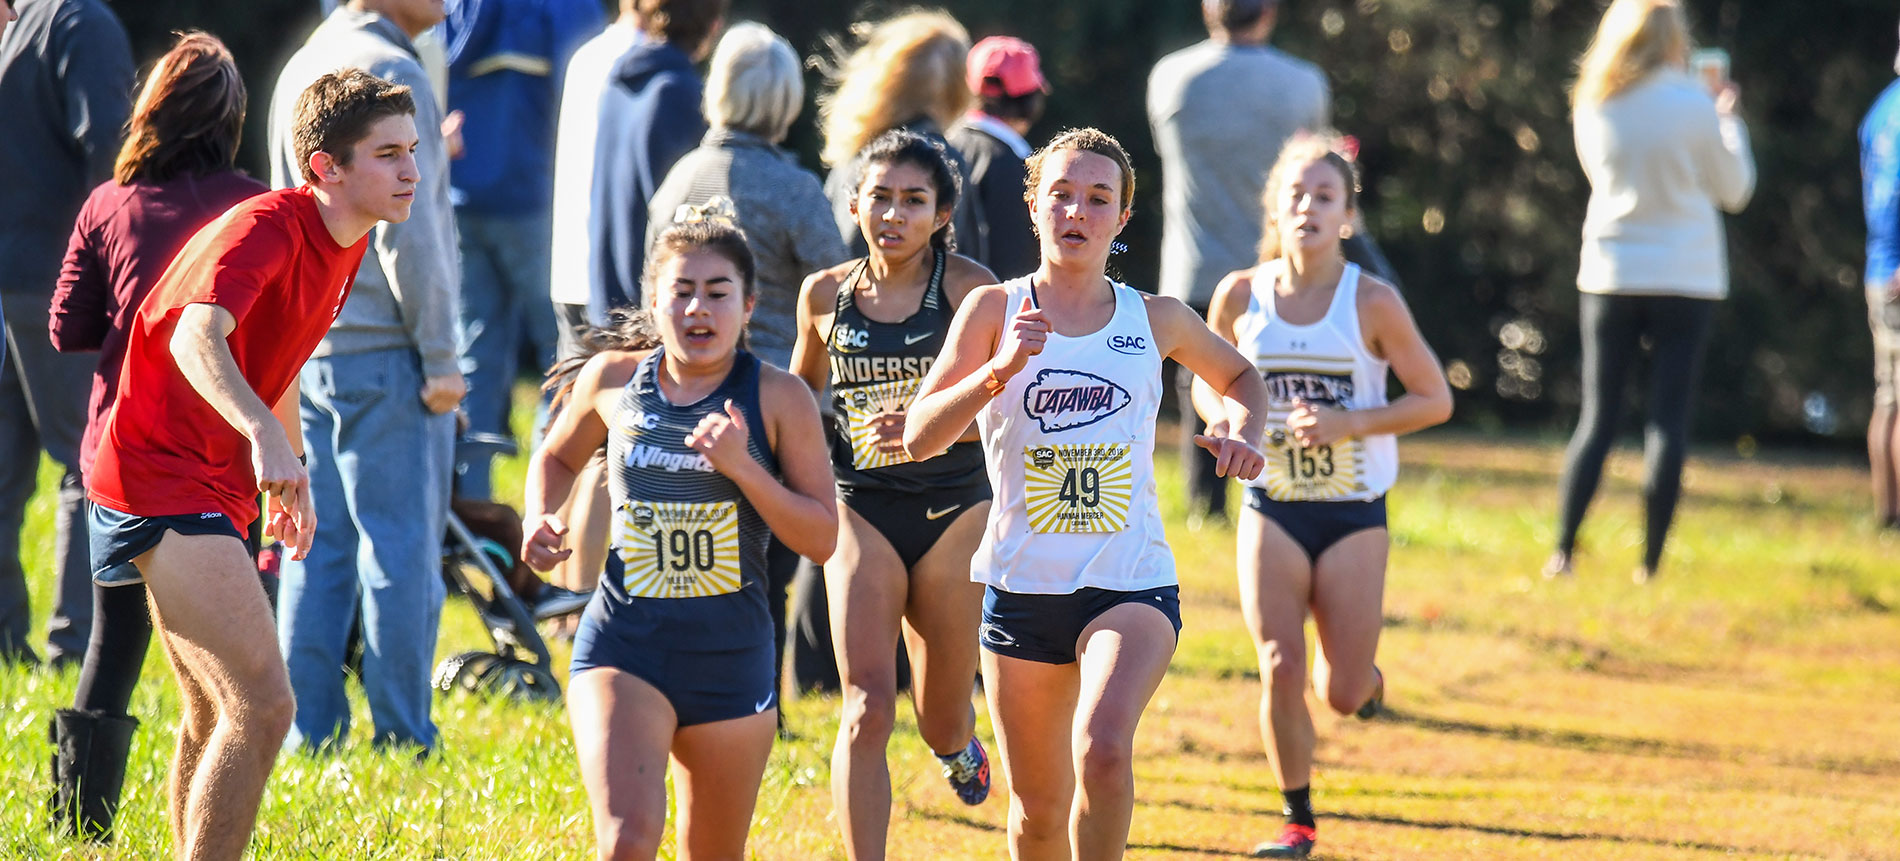 Women’s Cross Country Finishes 11th at Royals Challenge